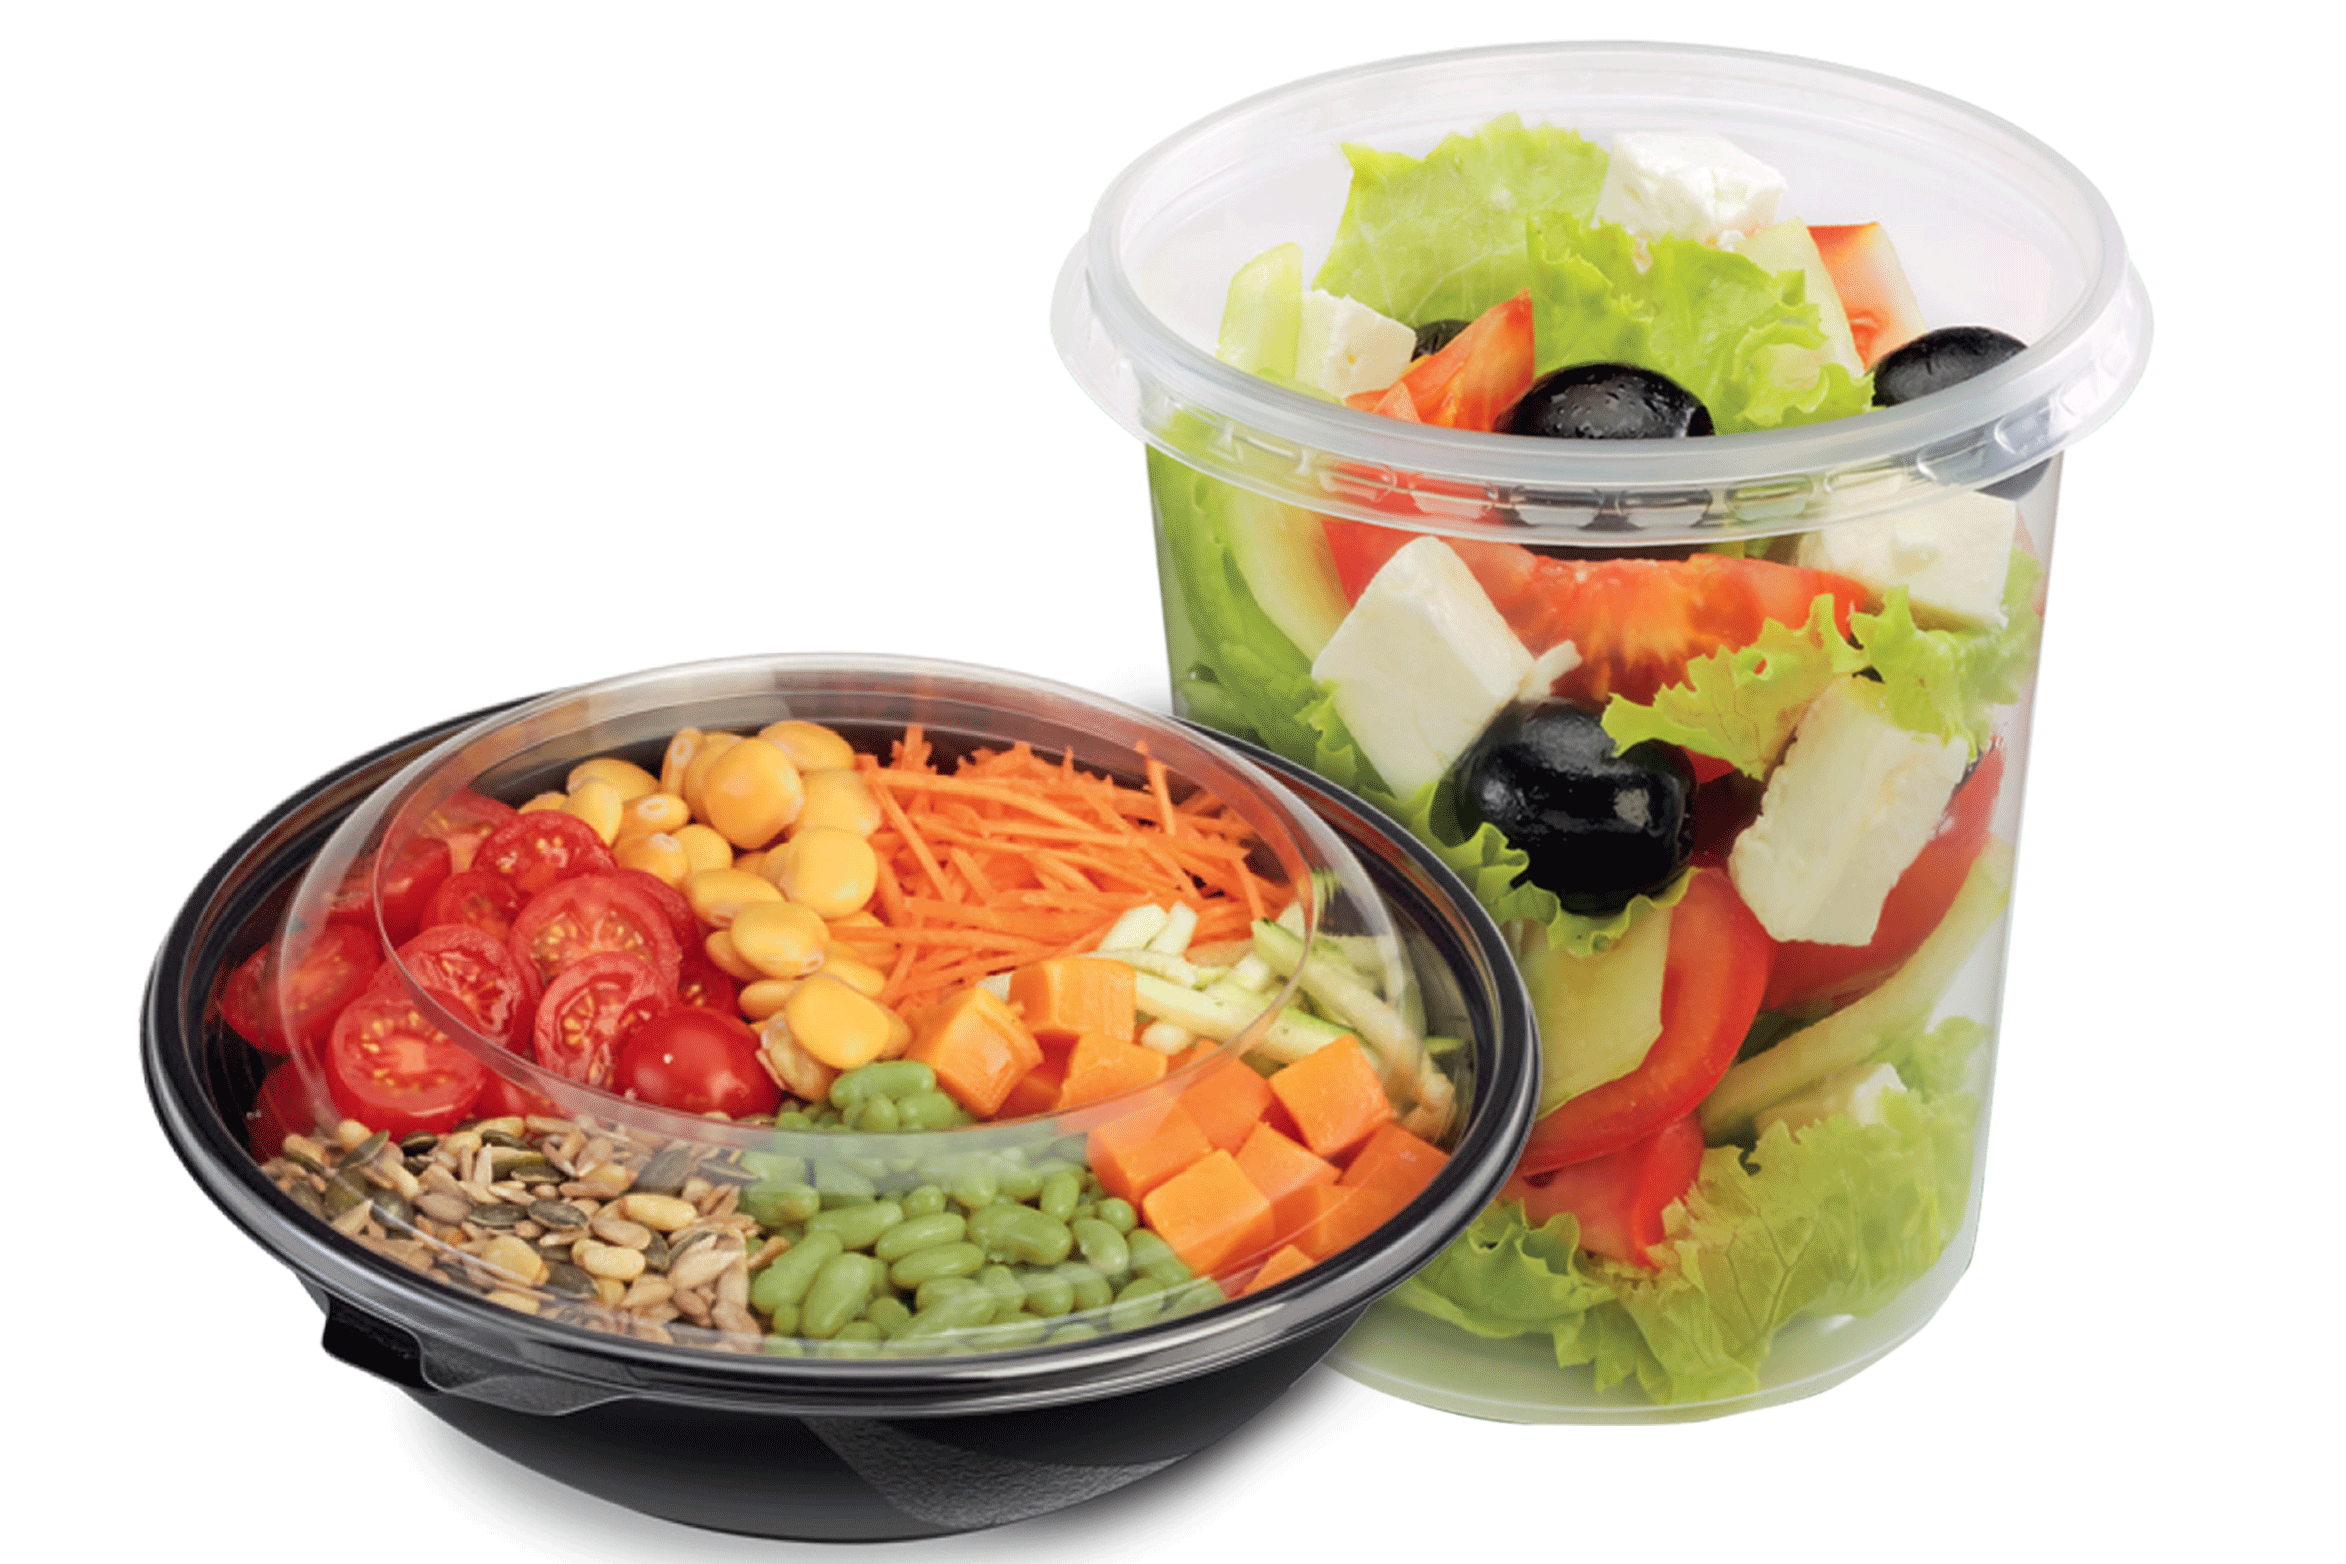 Salad and delicatessen containers